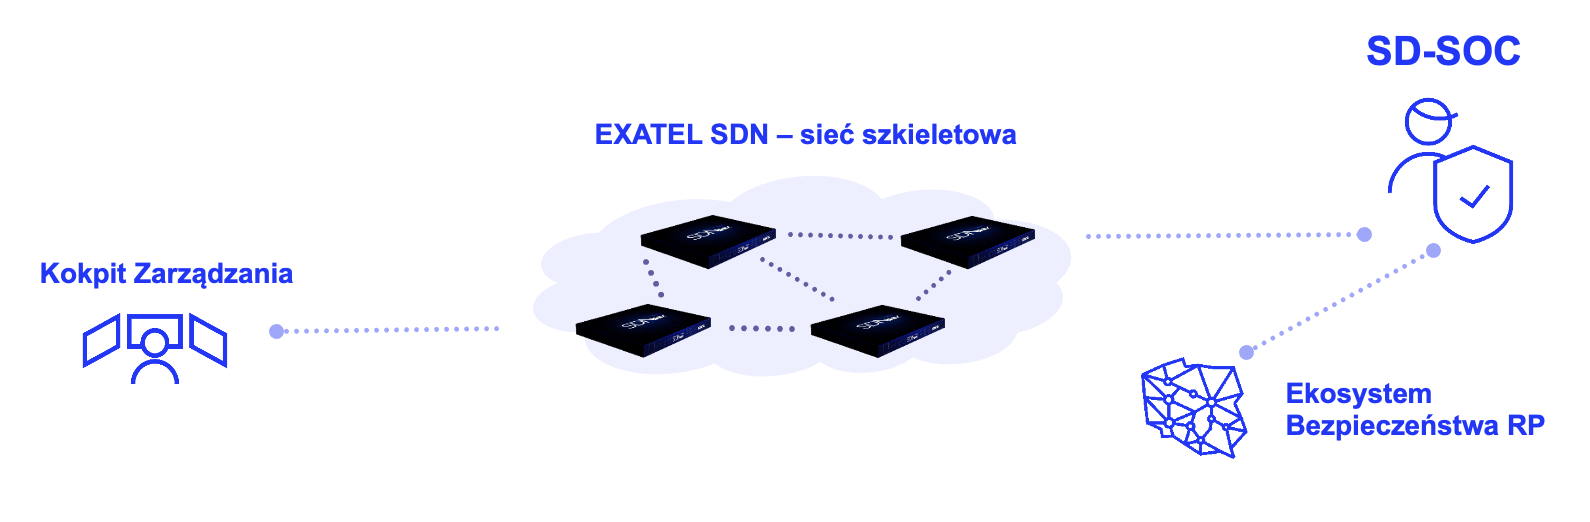 Critical Network SDN Security System